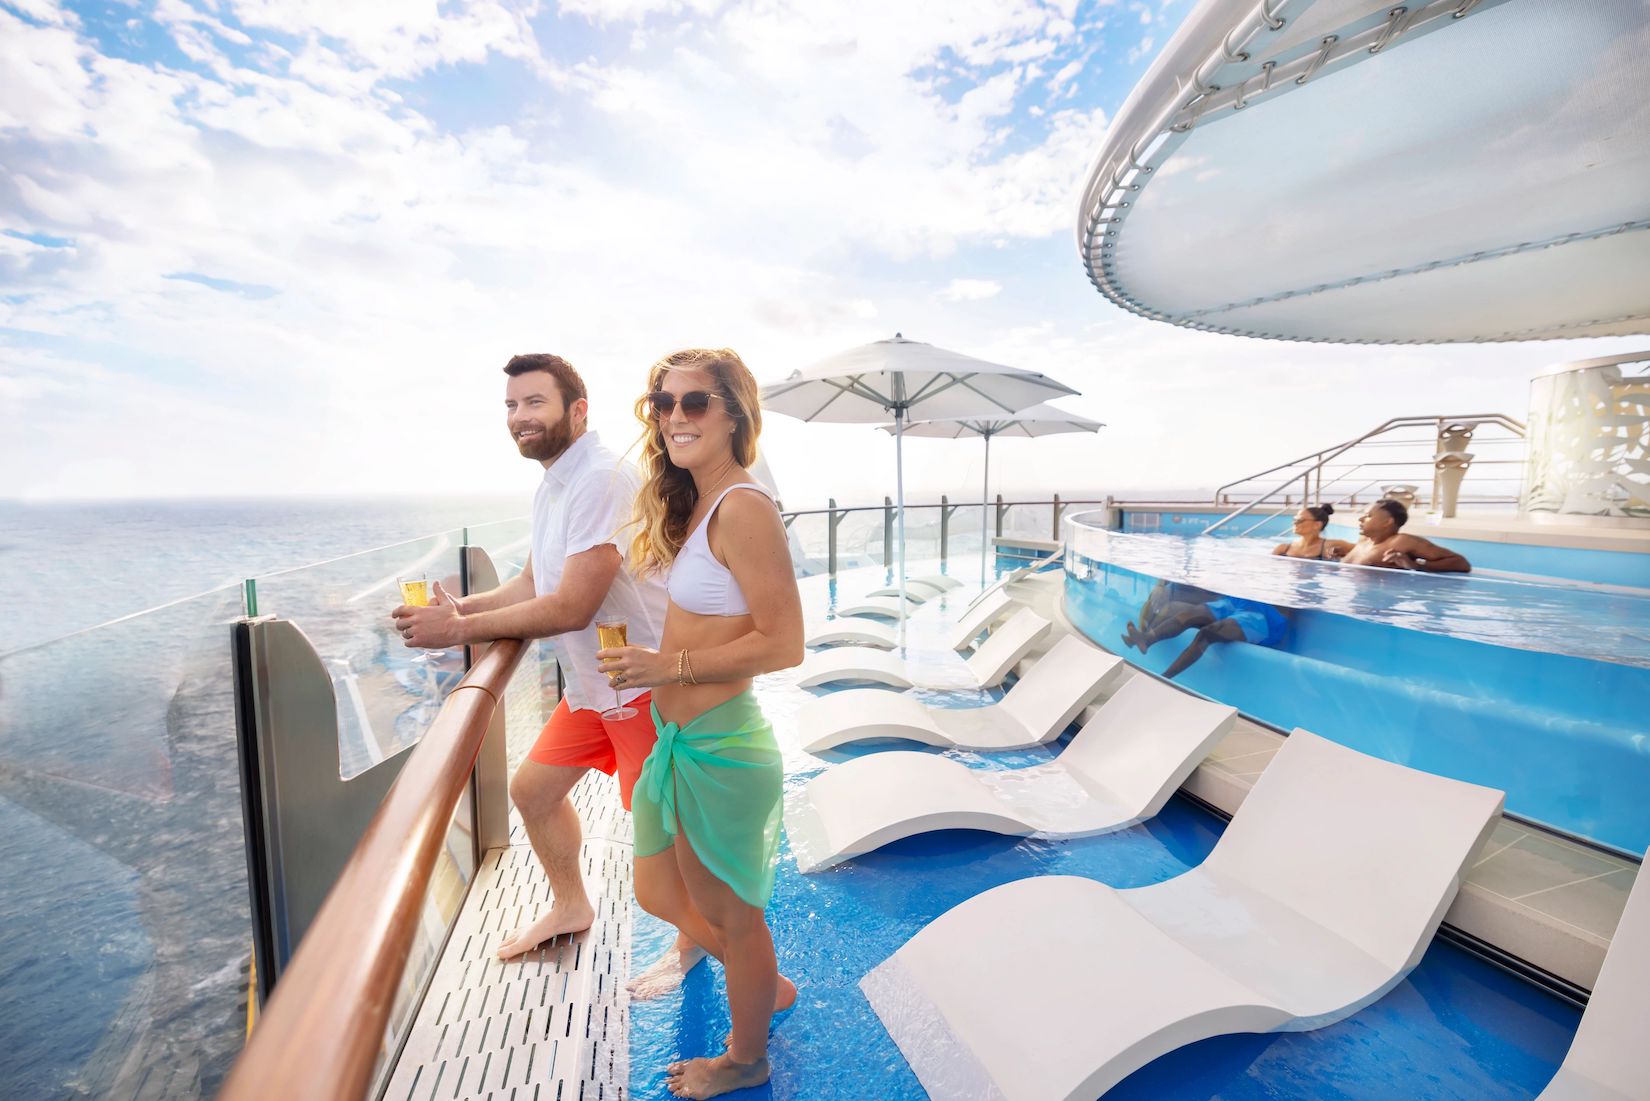 The Ultimate Cruise Packing List: What to Pack for a Cruise in 2023